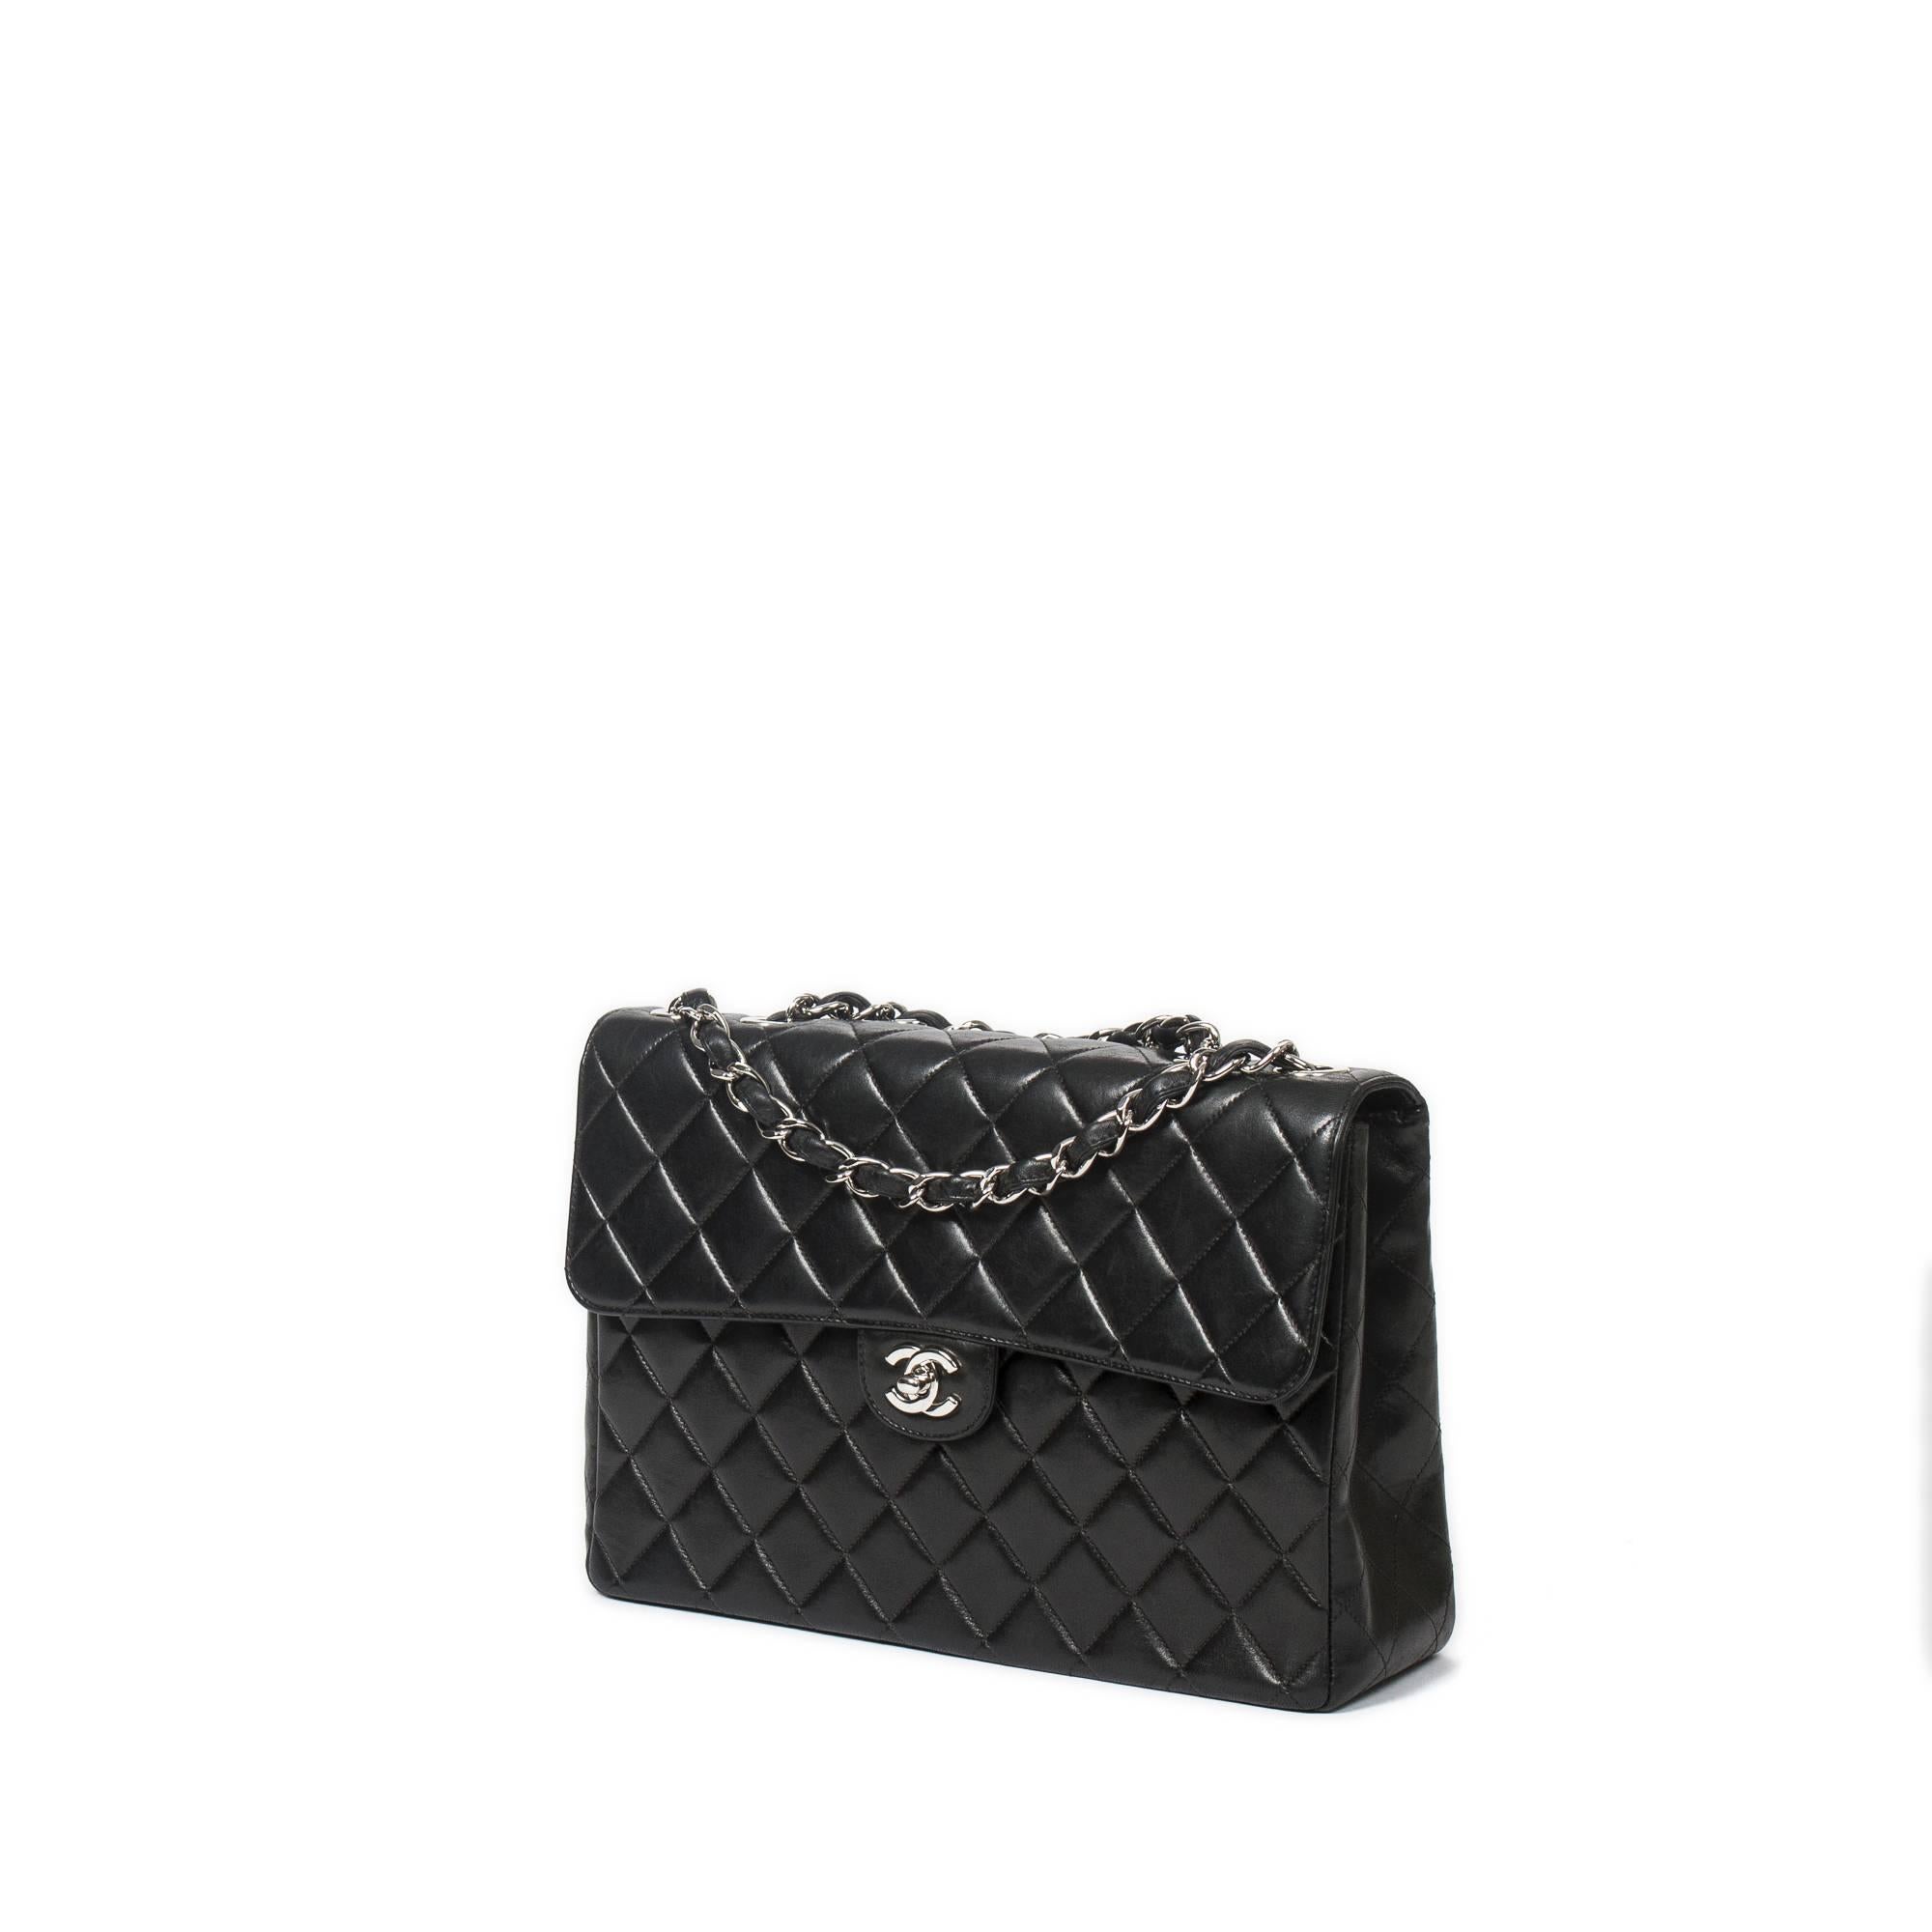 Chanel Classic Jumbo in black quilted leather with double chain strap interlaced with black leather (drop: single chain:63cm, double strap: 33cm). Silver CC turnlock and hardware. Interior in burgundy leather with one slip pocket and one zip pocket.